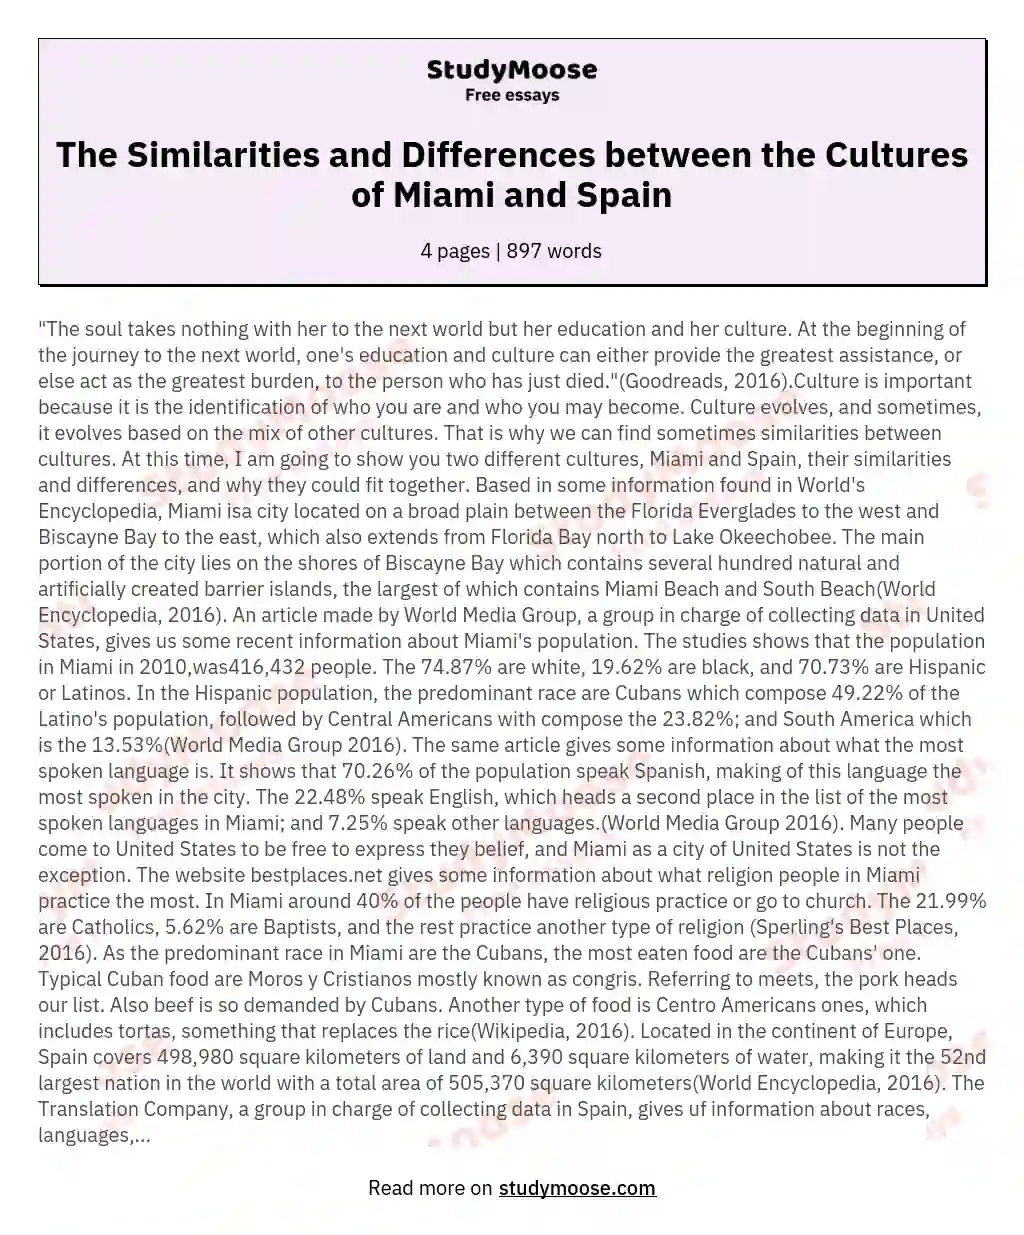 The Similarities and Differences between the Cultures of Miami and Spain essay